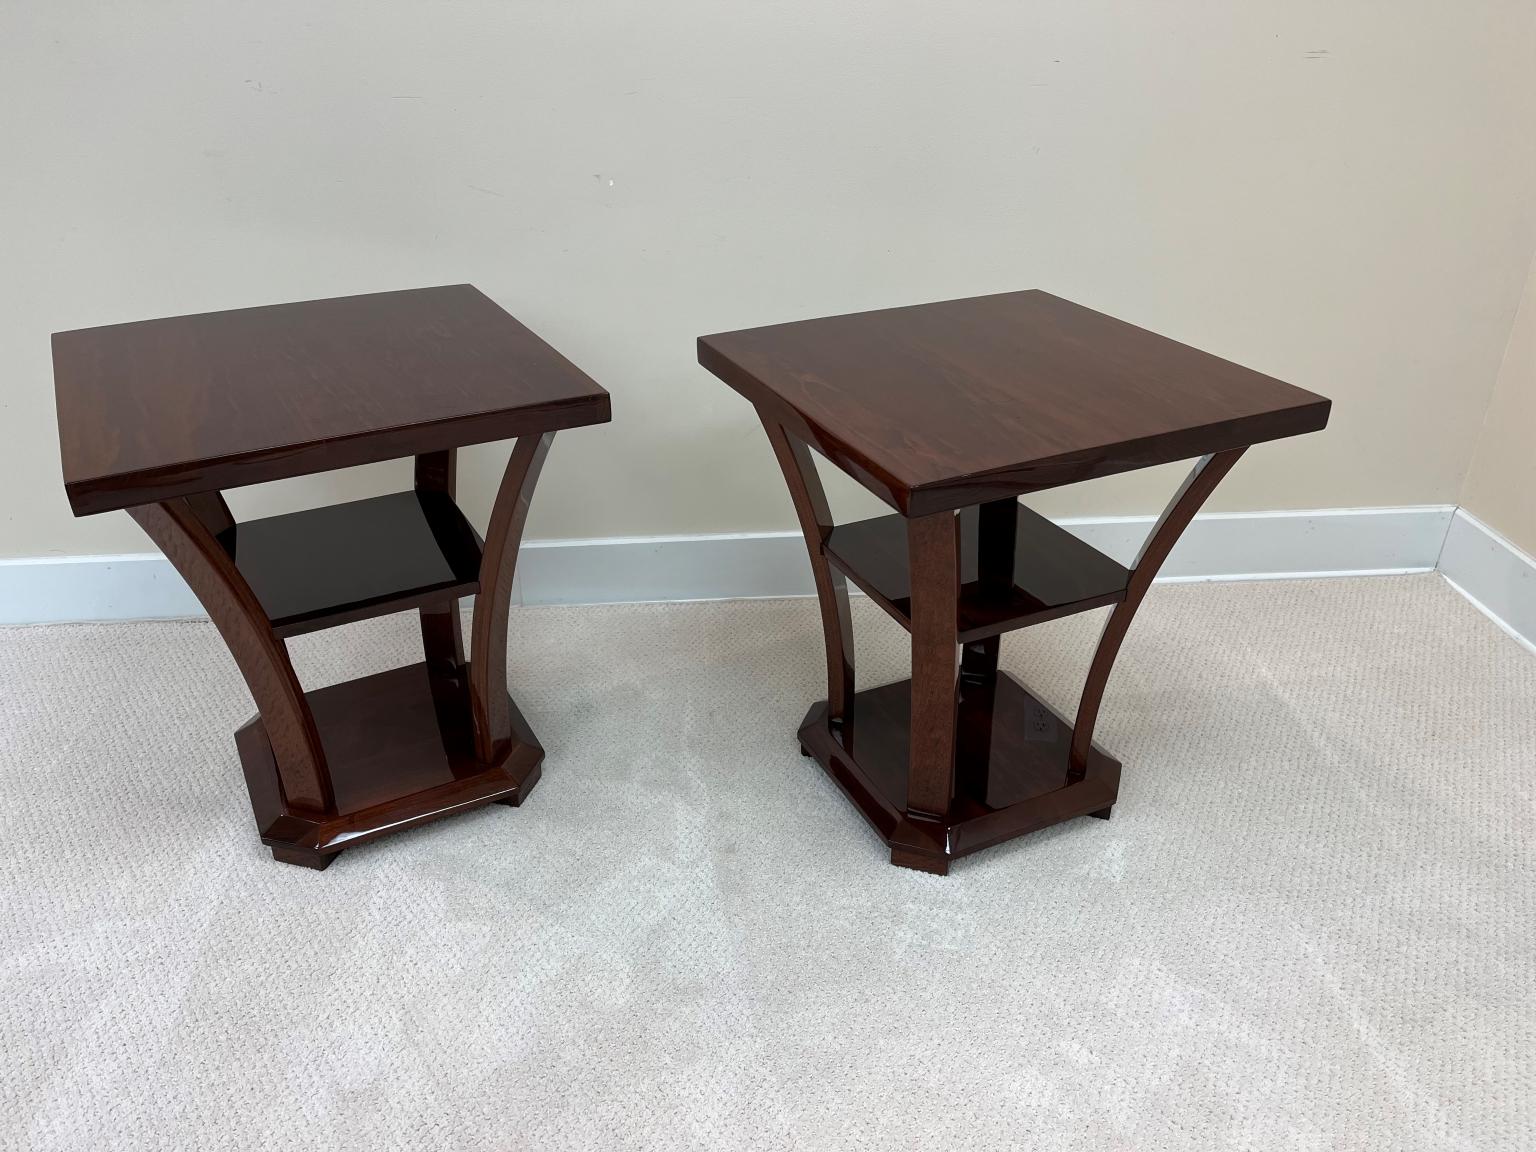 Maple Pair Of Art Deco Modernist Square Top Three Tier Side Tables, American C. 1930's For Sale